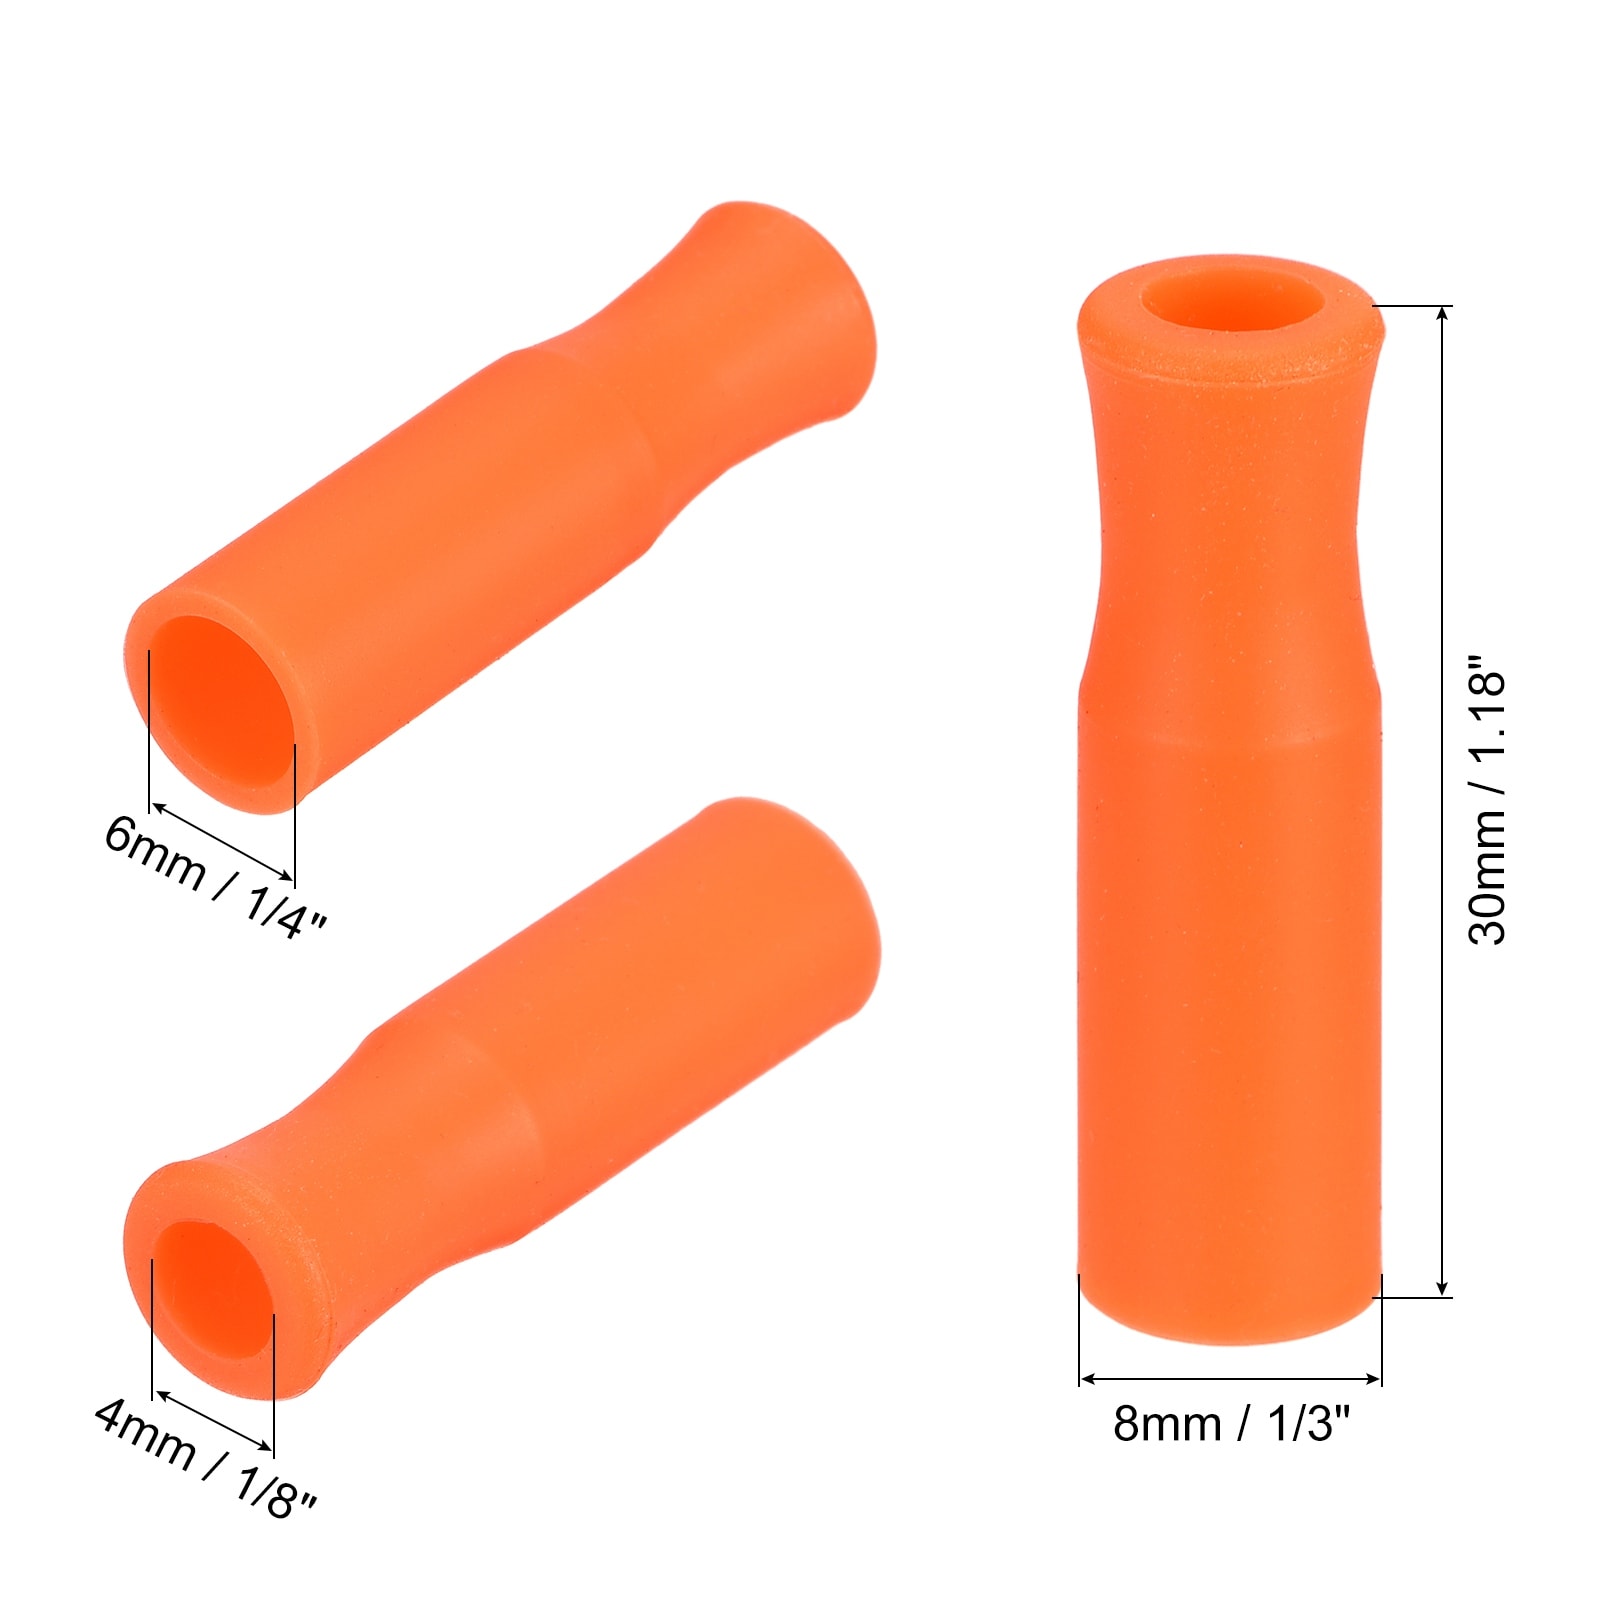 https://ak1.ostkcdn.com/images/products/is/images/direct/990f5d7d31088d19b0f80a2dc7b3cb6a748e9544/12pcs-Silicone-Straw-Tips-for-Stainless-Steel-Straws.jpg